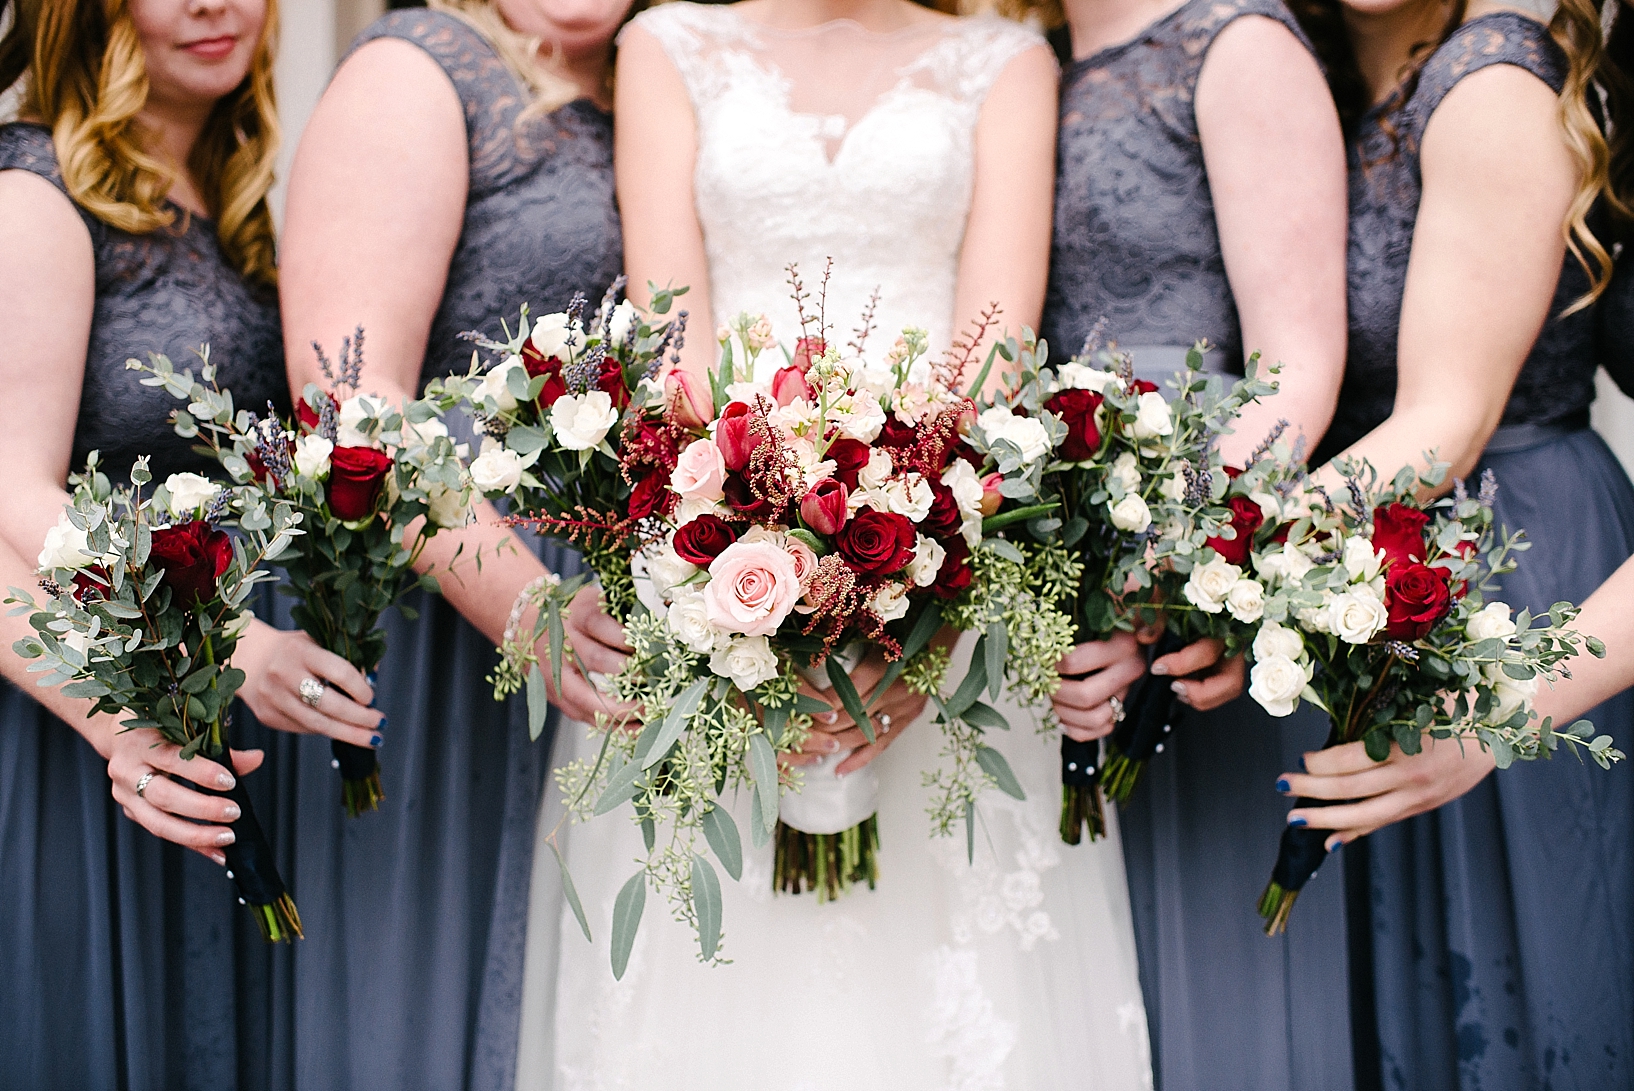 bridesmaids in gray lace dresses holding winter bouquets of burgundy, pink, and white roses